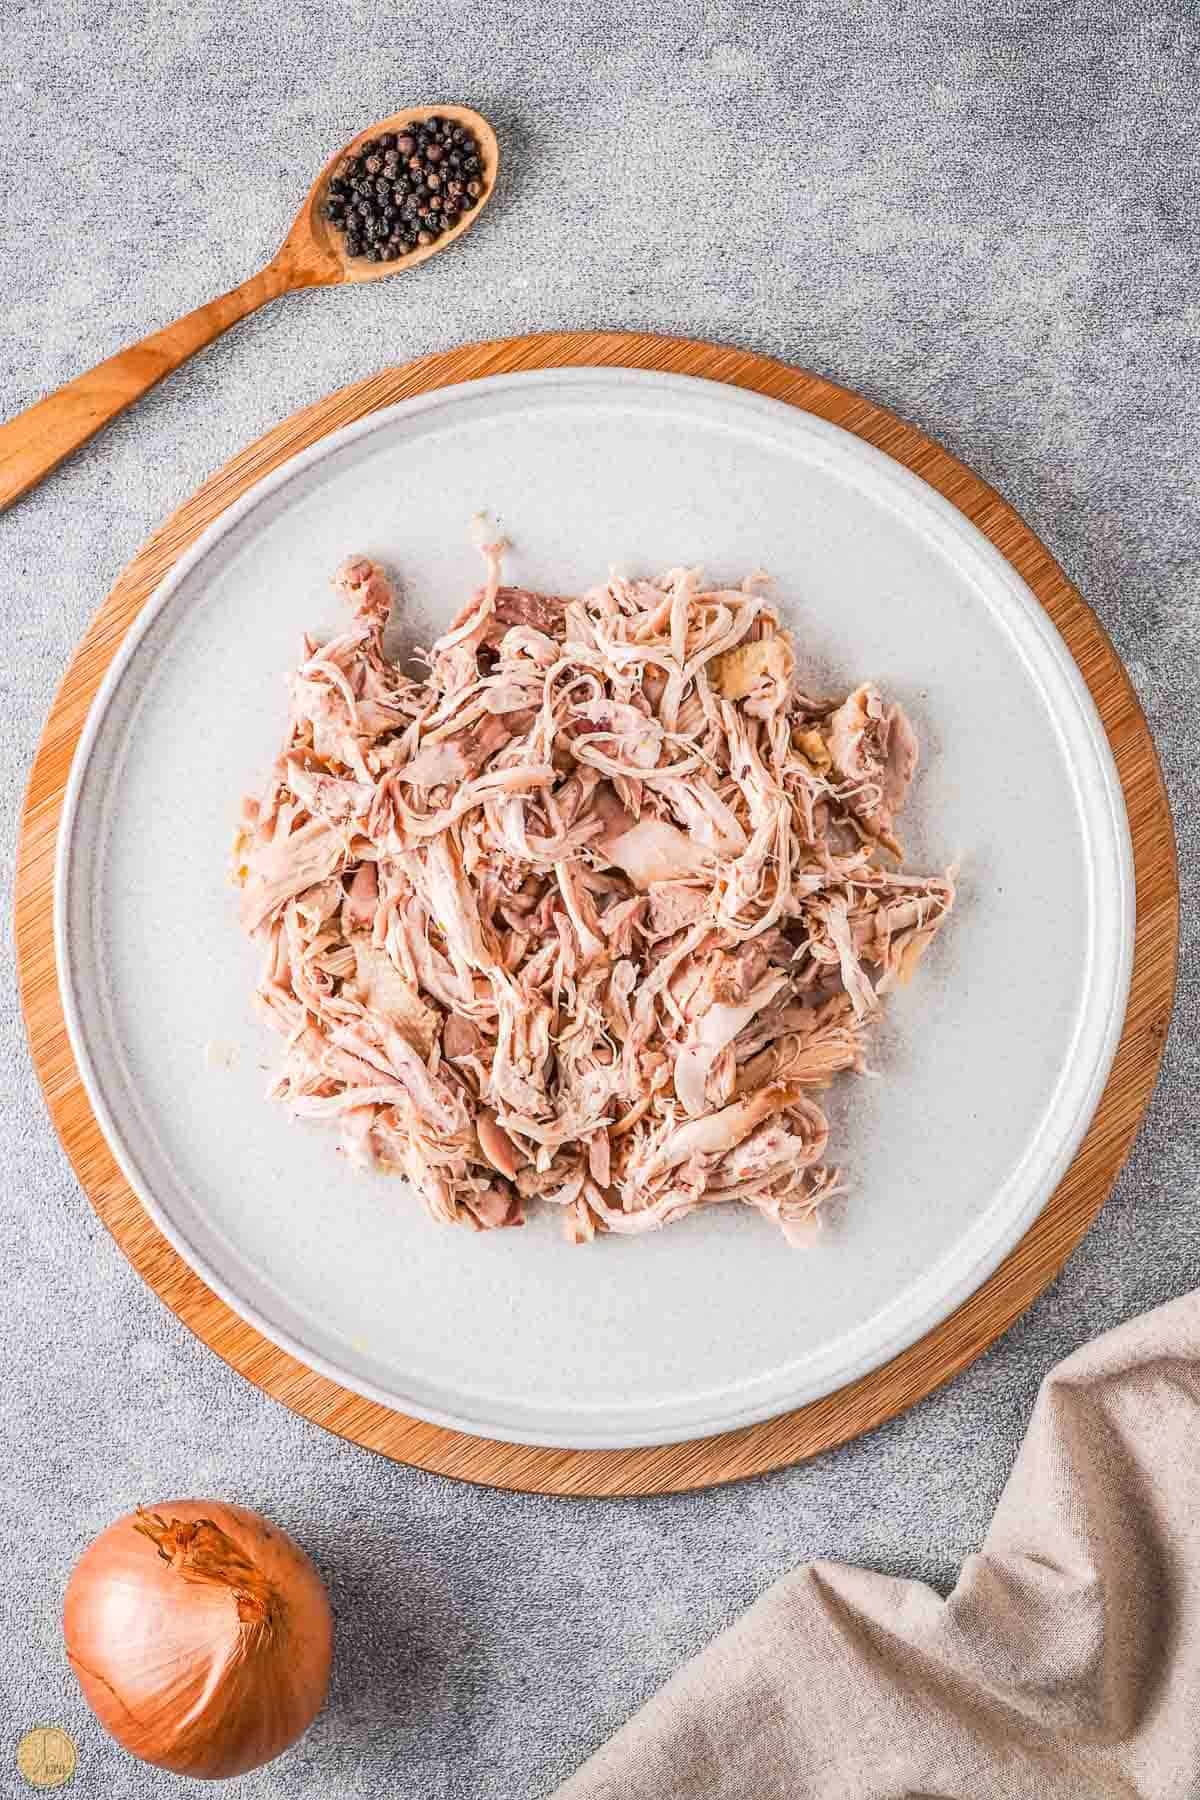 shredded chicken on a plate